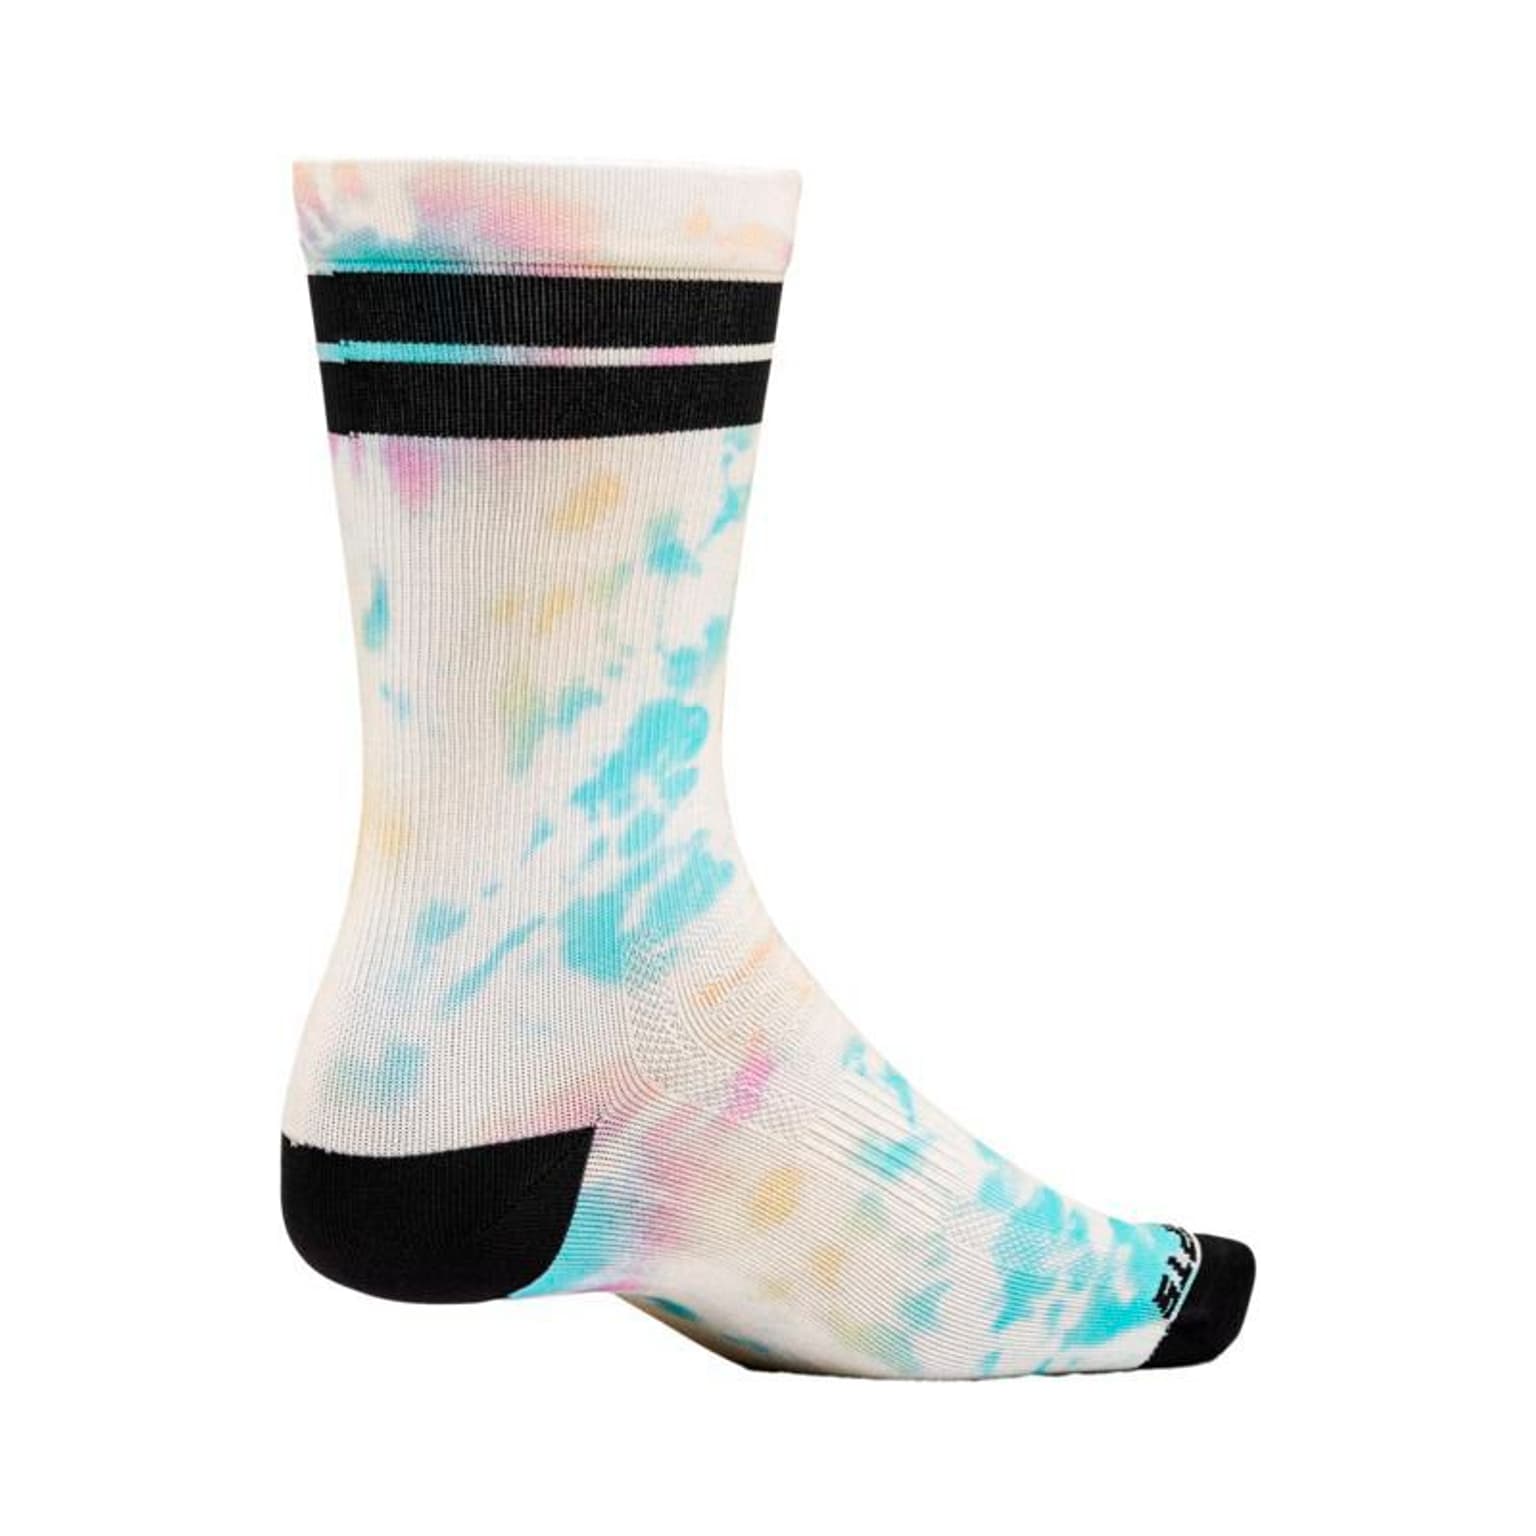 Ride Concepts Ride Concepts Alibi Synthetic Velosocken rohweiss 2